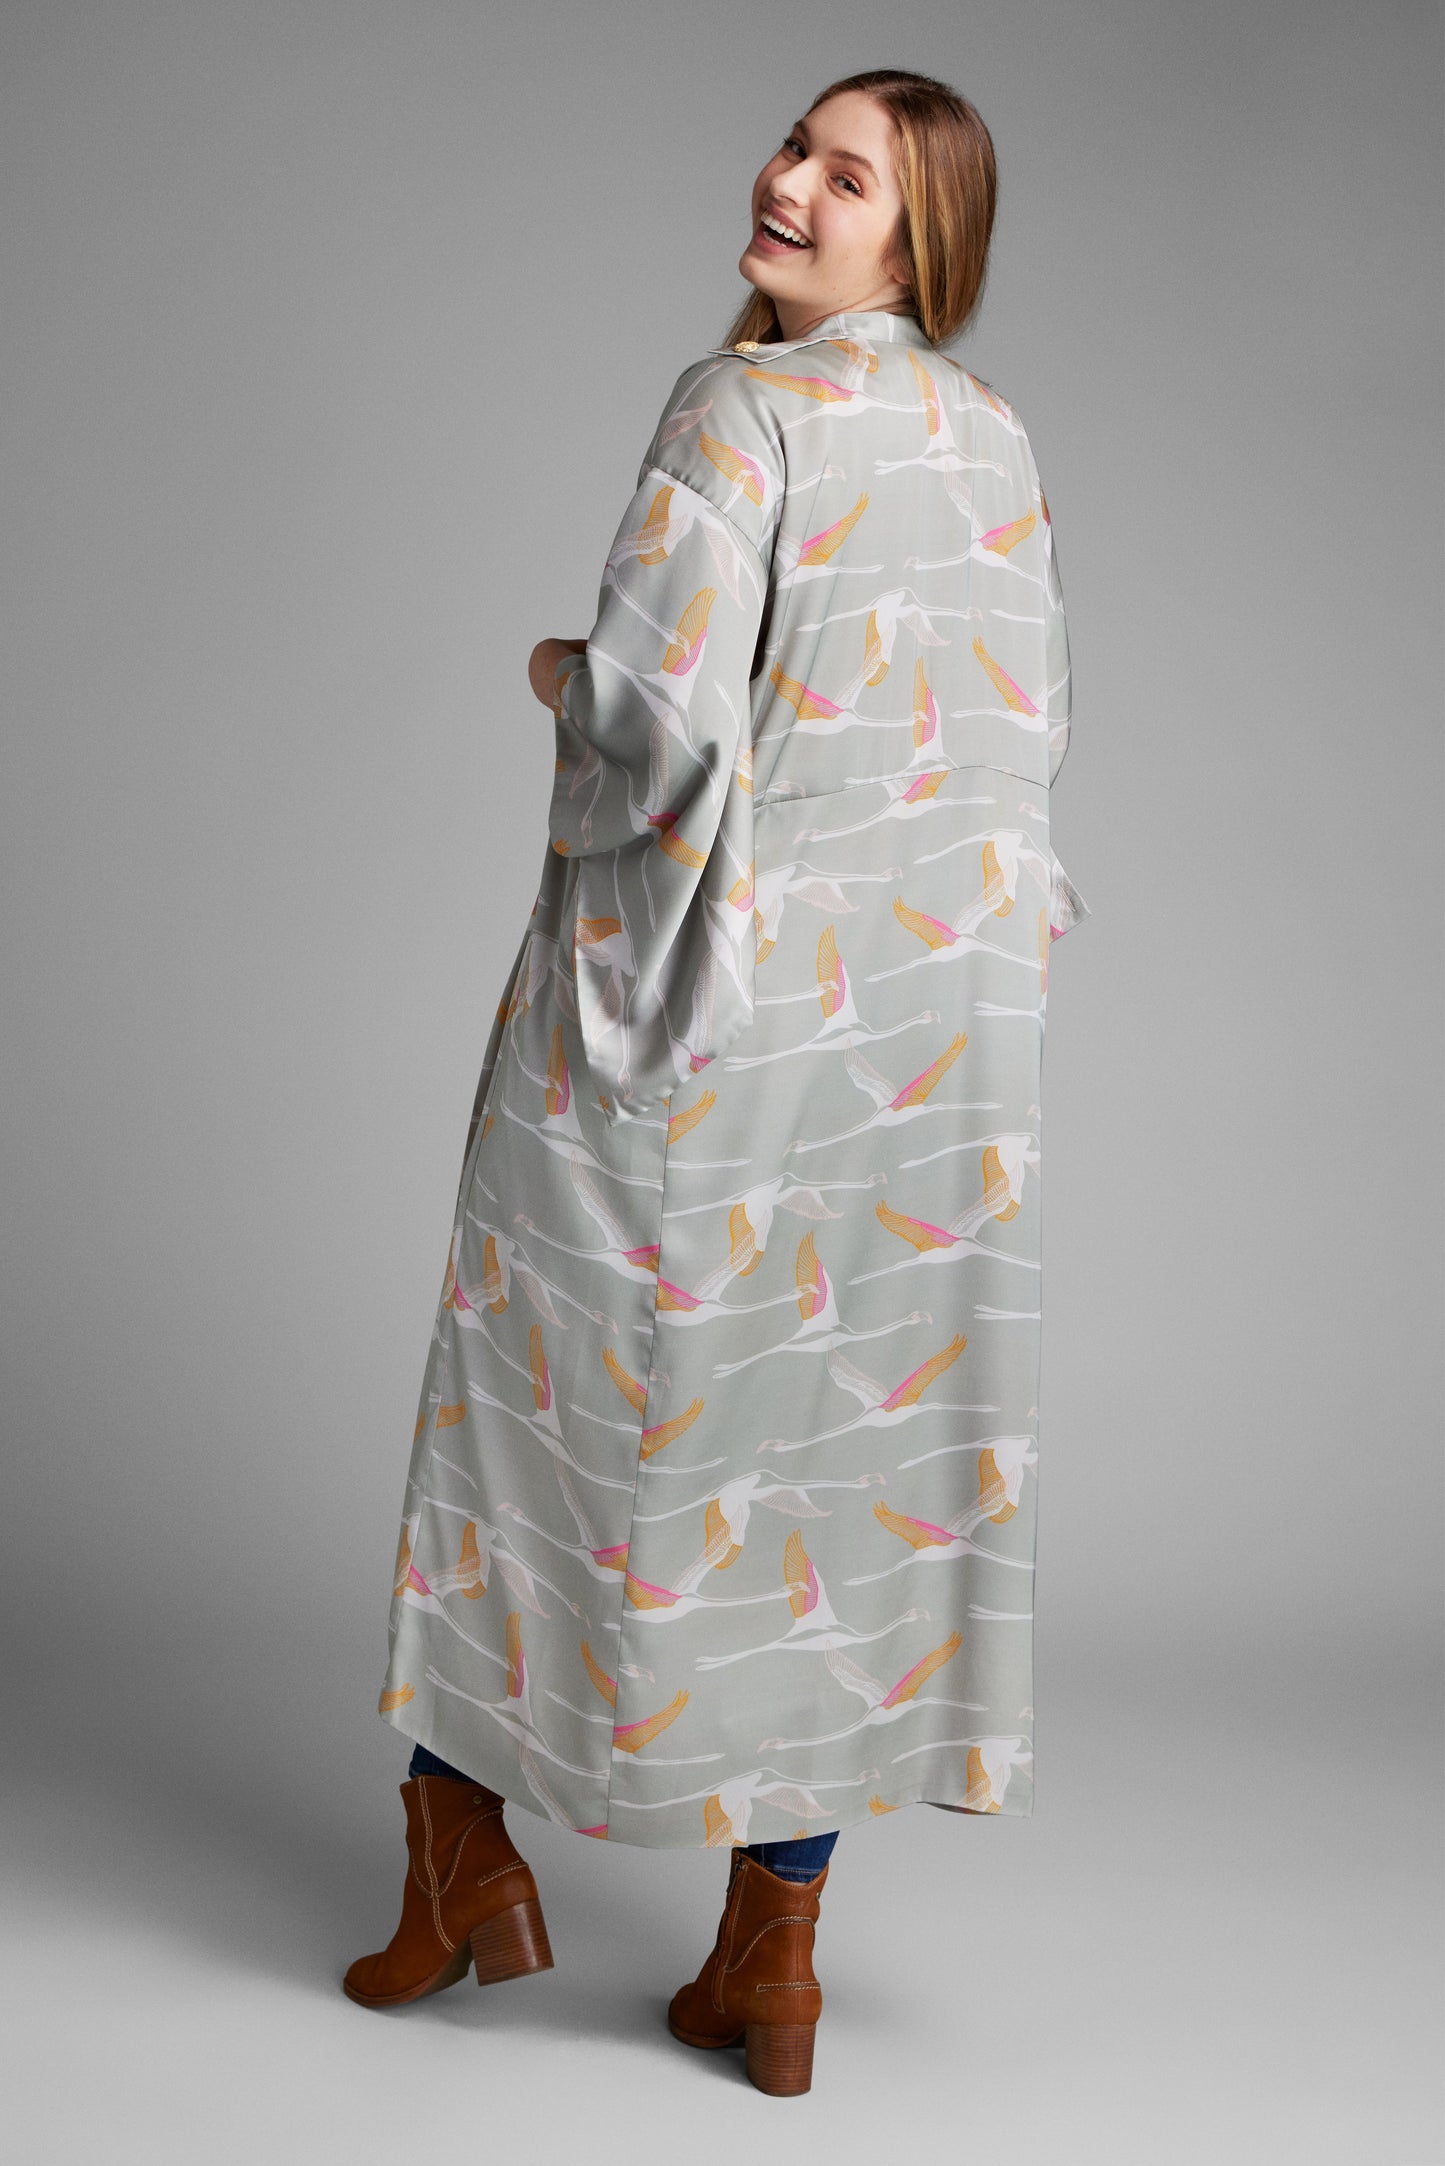 Back profile view of woman wearing a grey pink and gold colored crane print kimono duster made from recycled materials 3